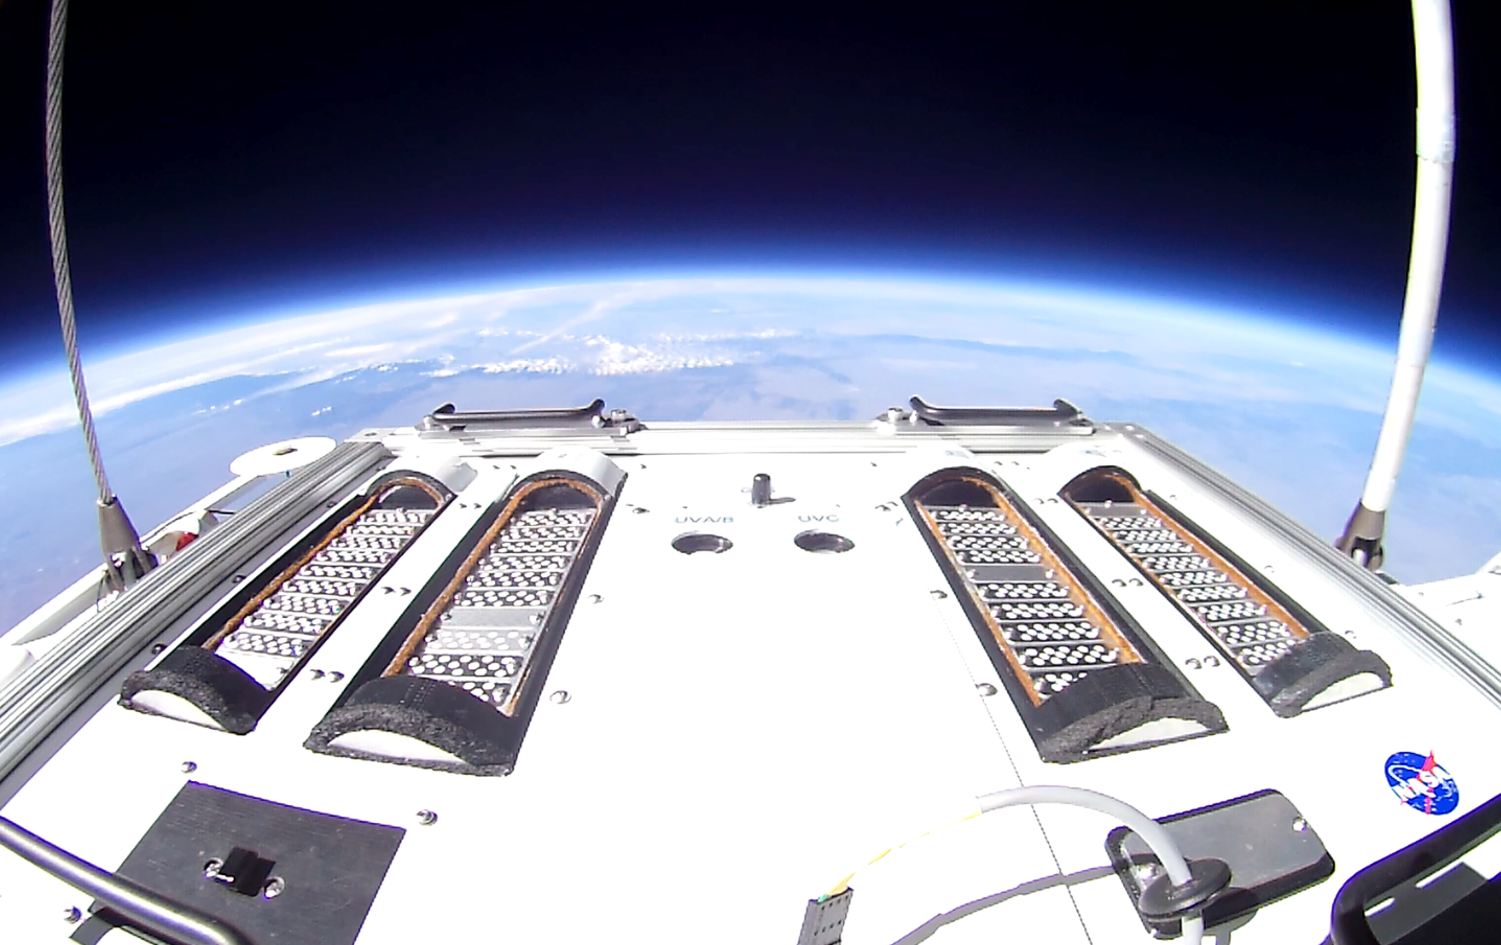 The E-MIST experimental hardware floating 19 miles above the Earth aboard a NASA scientific balloon.